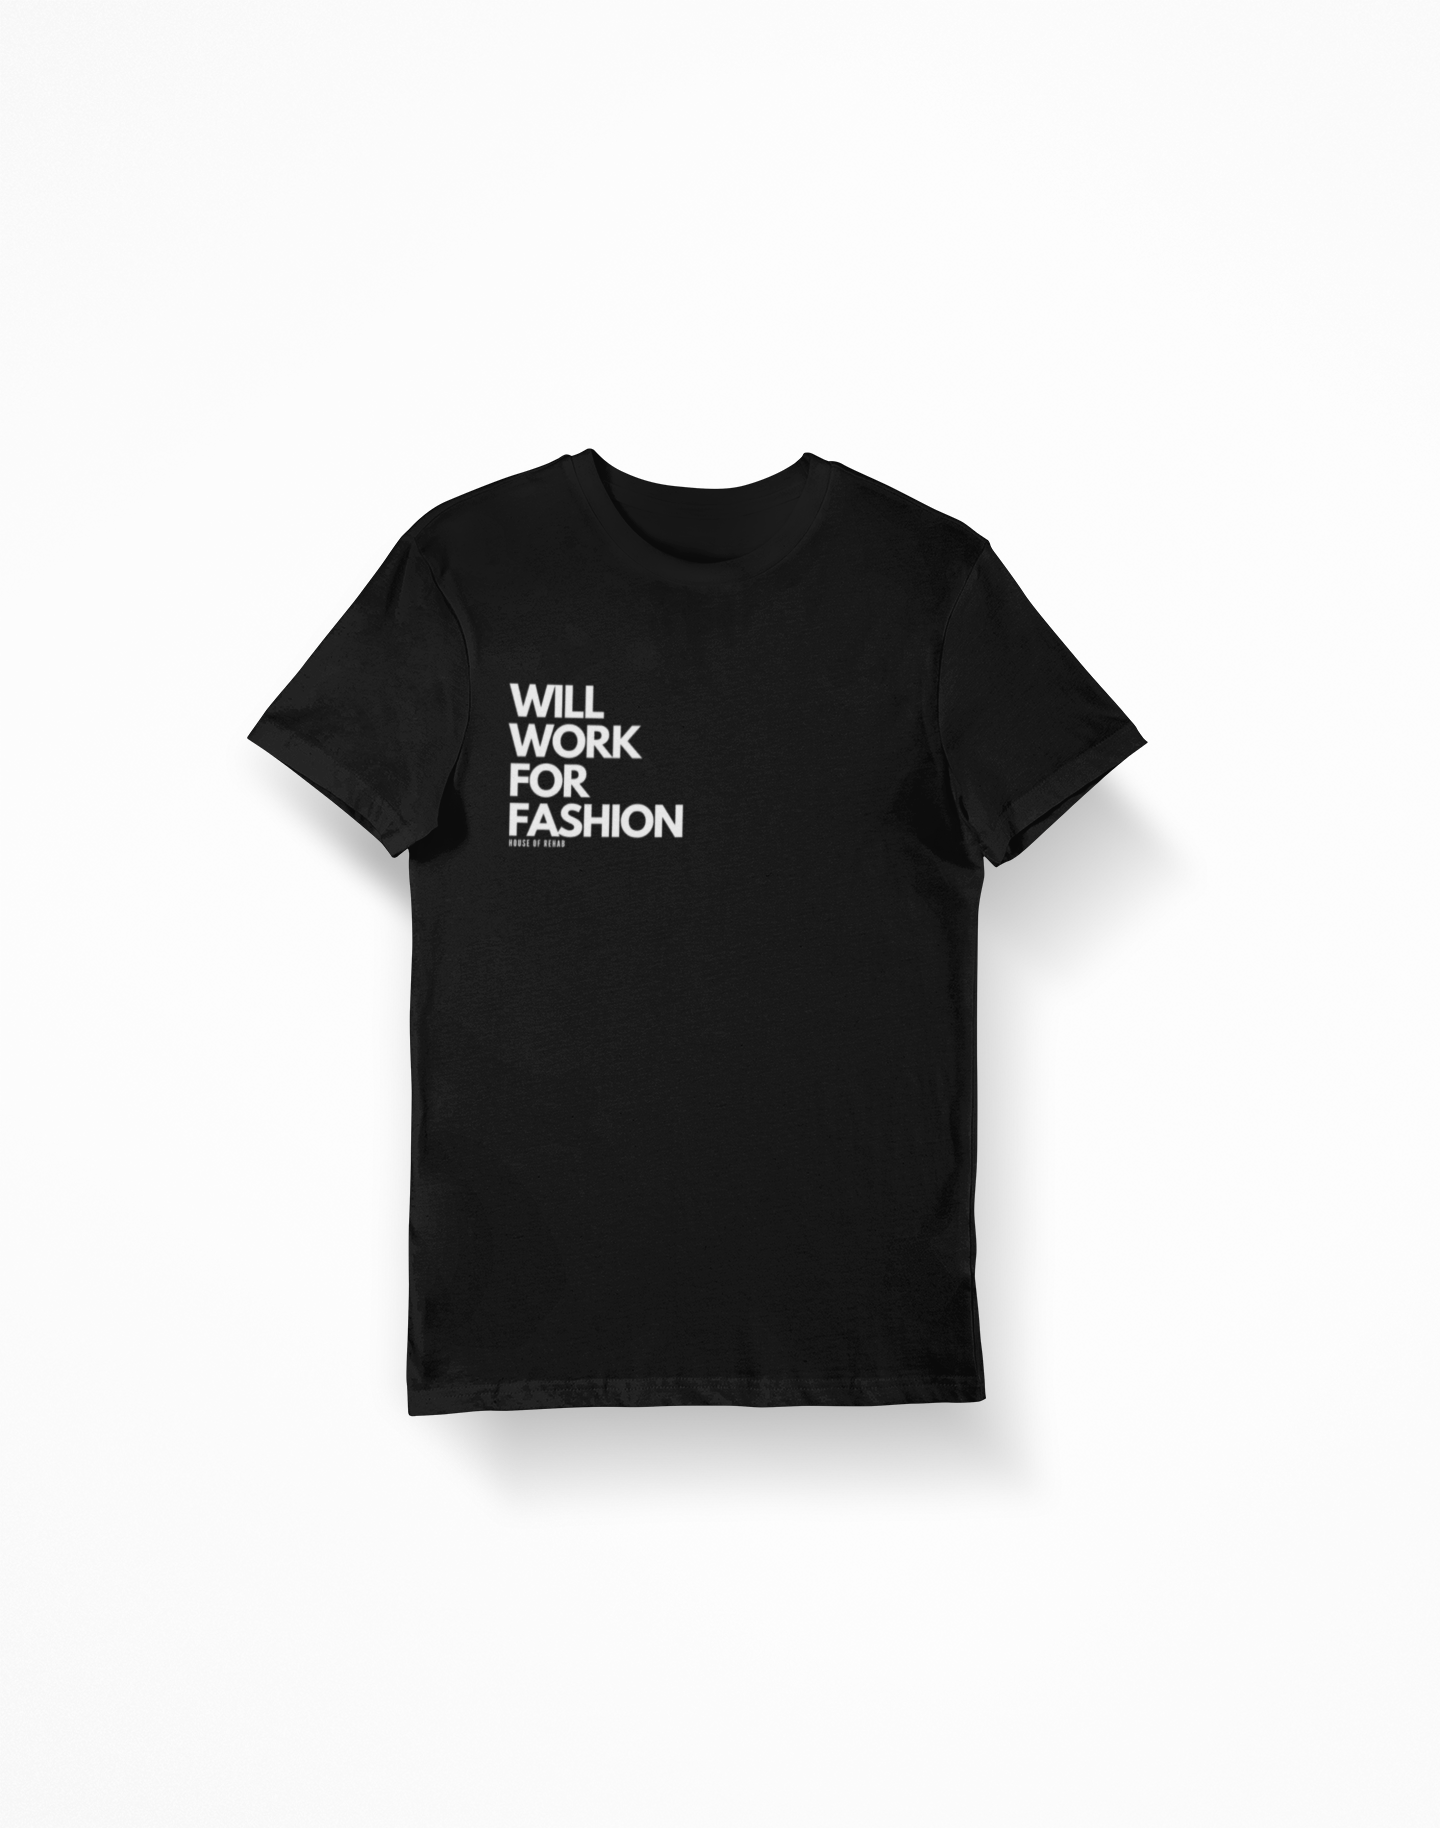 WILL WORK FOR FASHION TEE